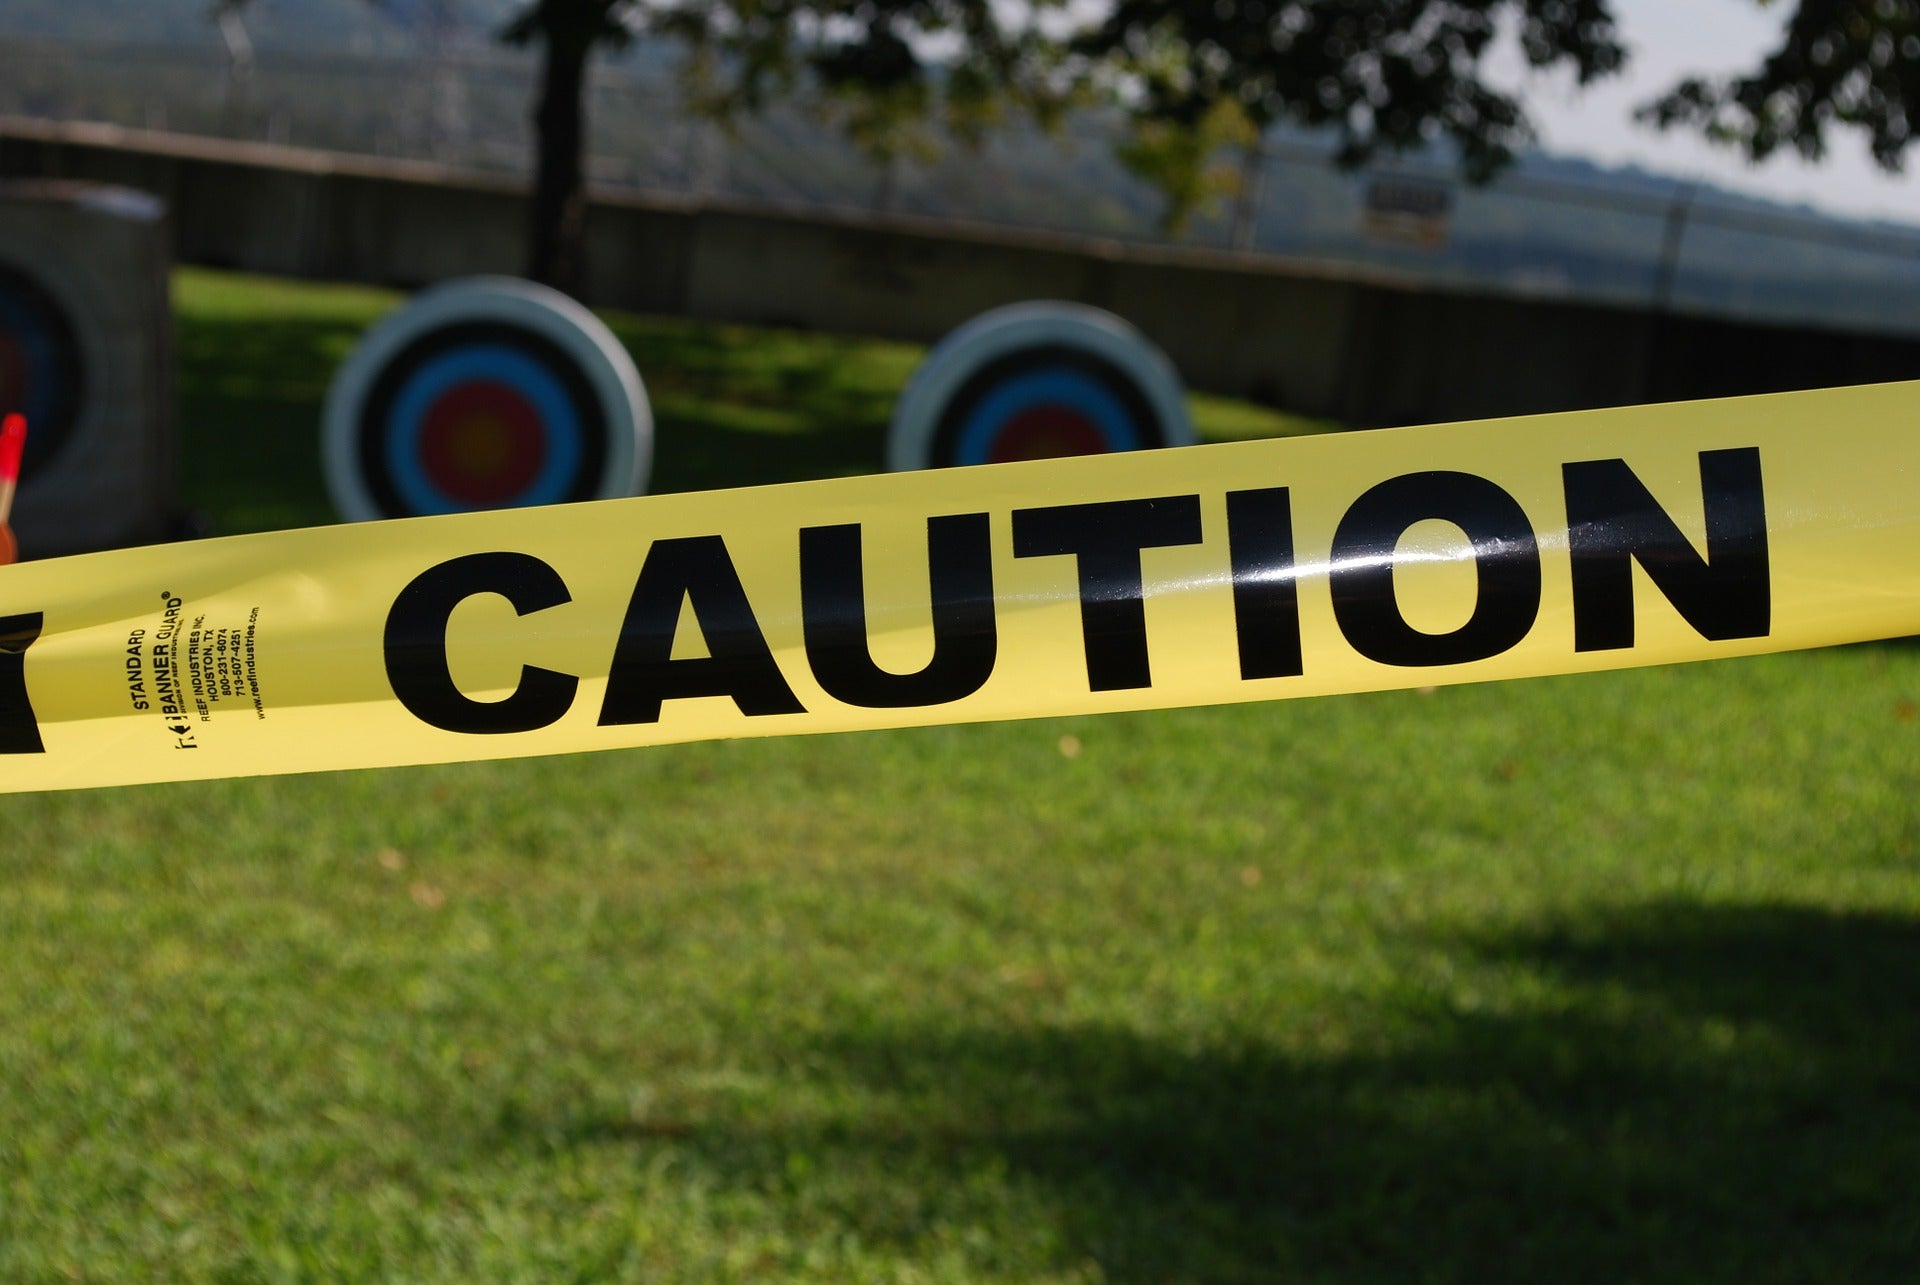 Caution tape, representing the caution issued against a pharmacist for an error by an employee